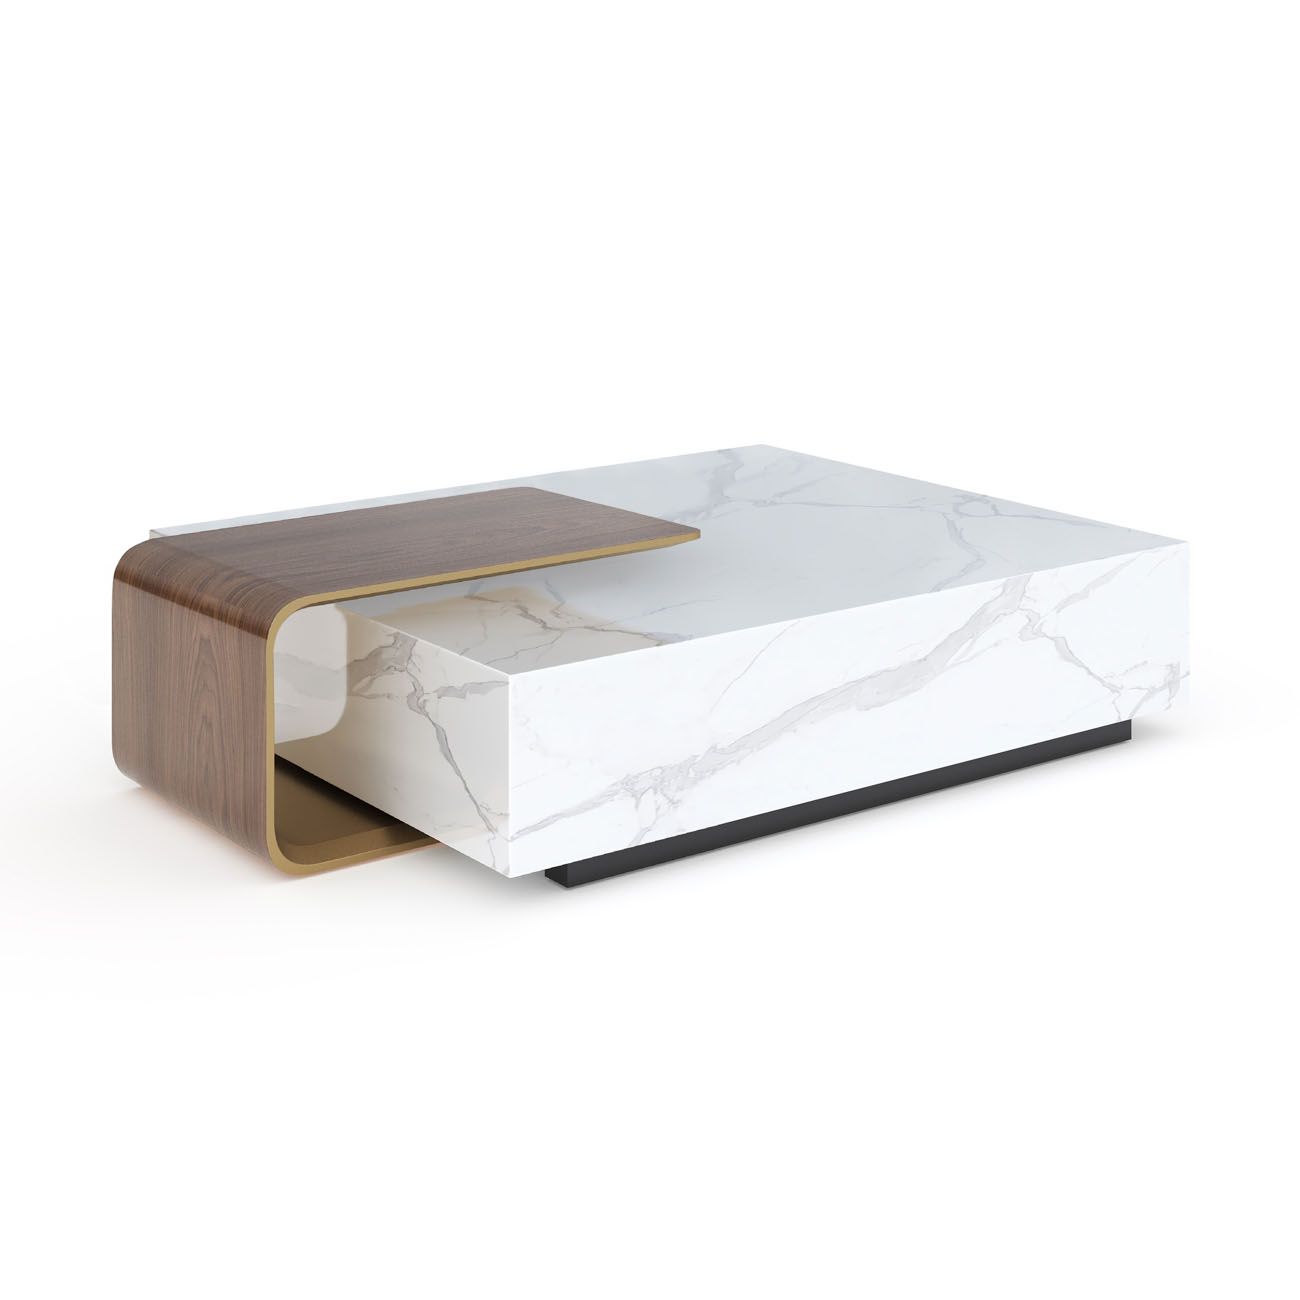 ASTON MARBLE HOME | V292 MARBLE COFFEE TABLE WITH WOOD COMP. - $11,998.00